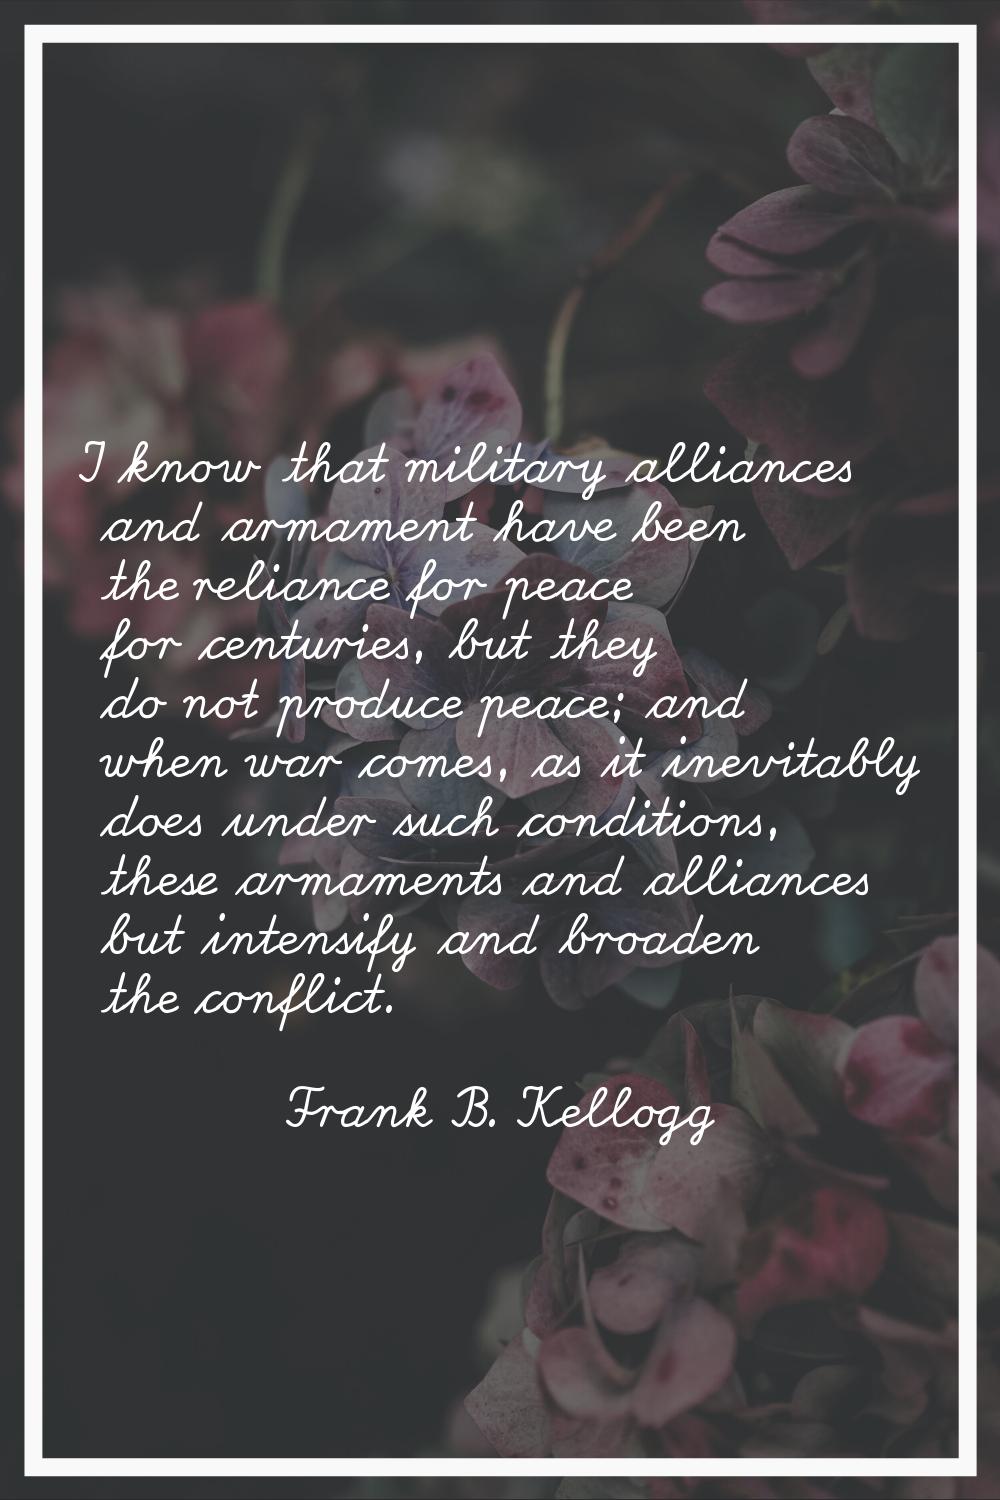 I know that military alliances and armament have been the reliance for peace for centuries, but the